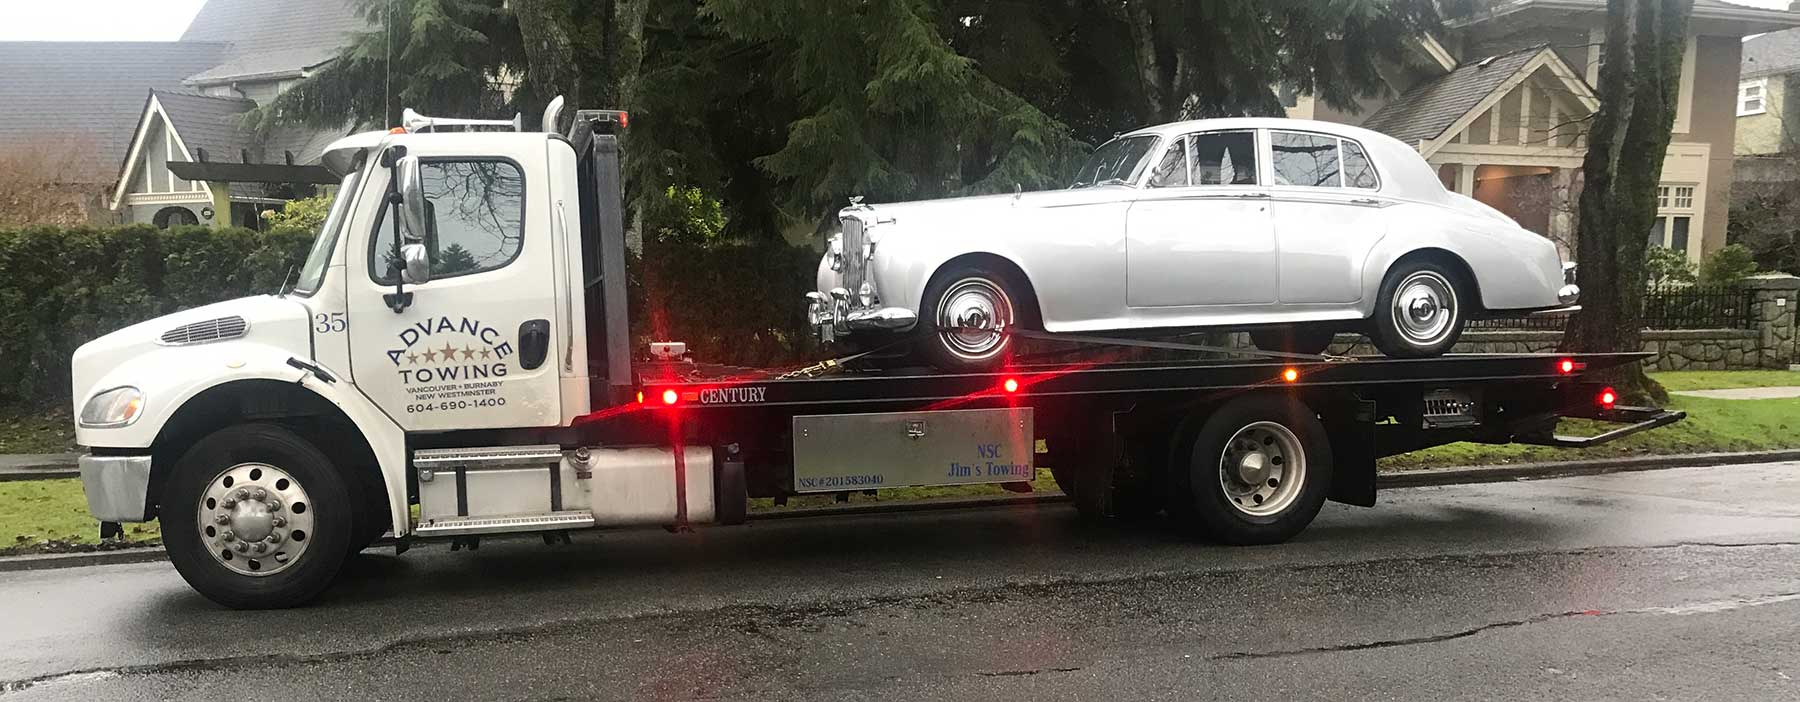 A Luxury Vehicle towed by a advance towing truck on a city street